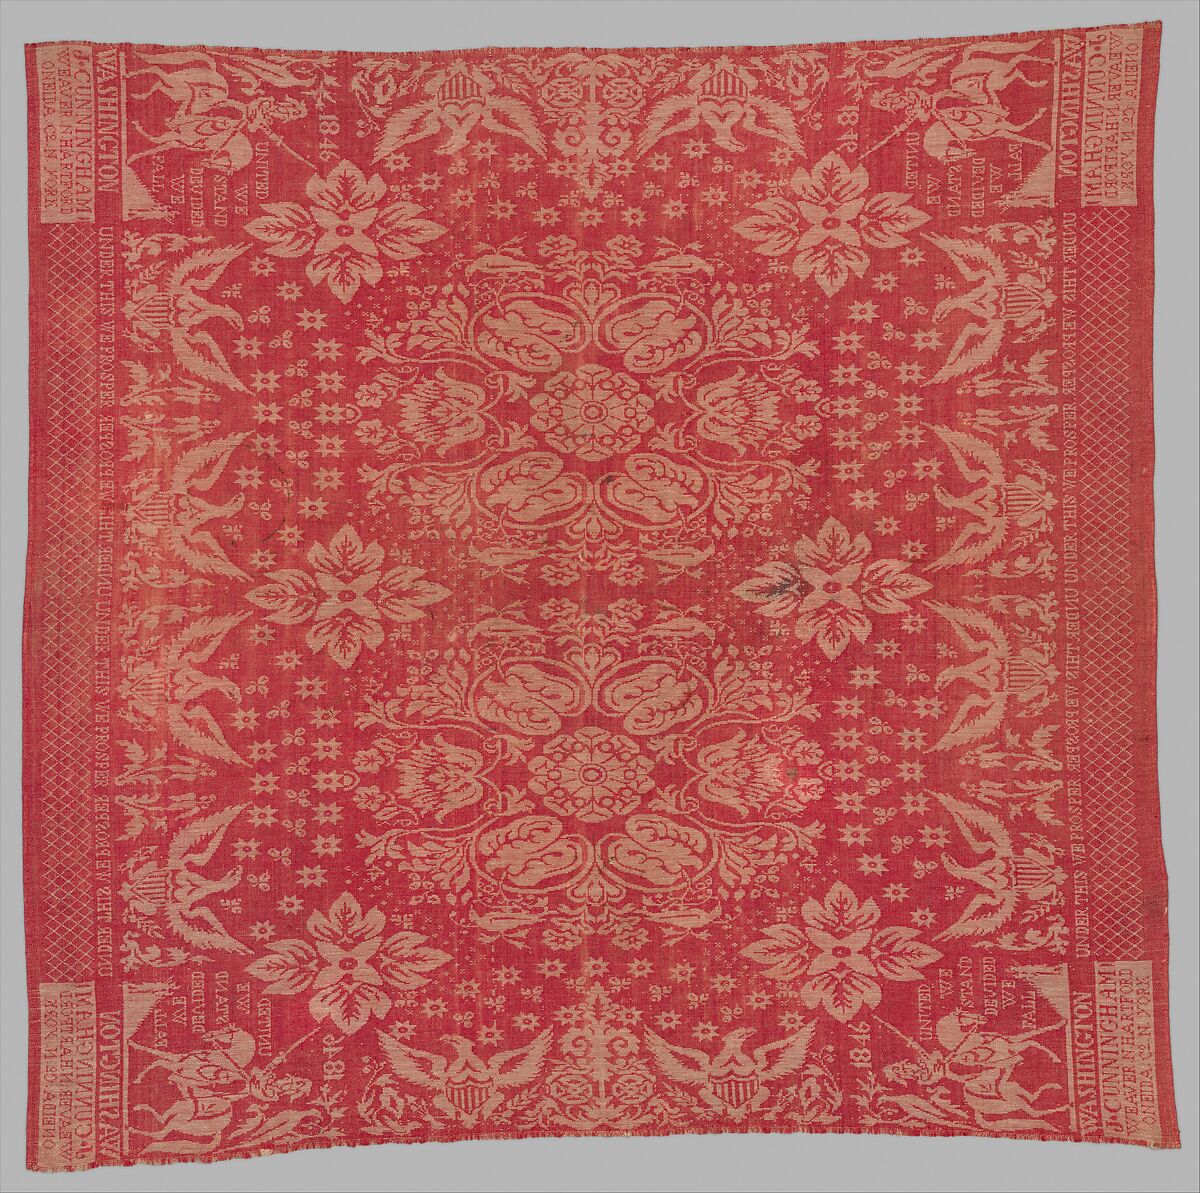 Tablecover, J. Cunningham (born 1793), Cotton (?) and wool, woven, American 